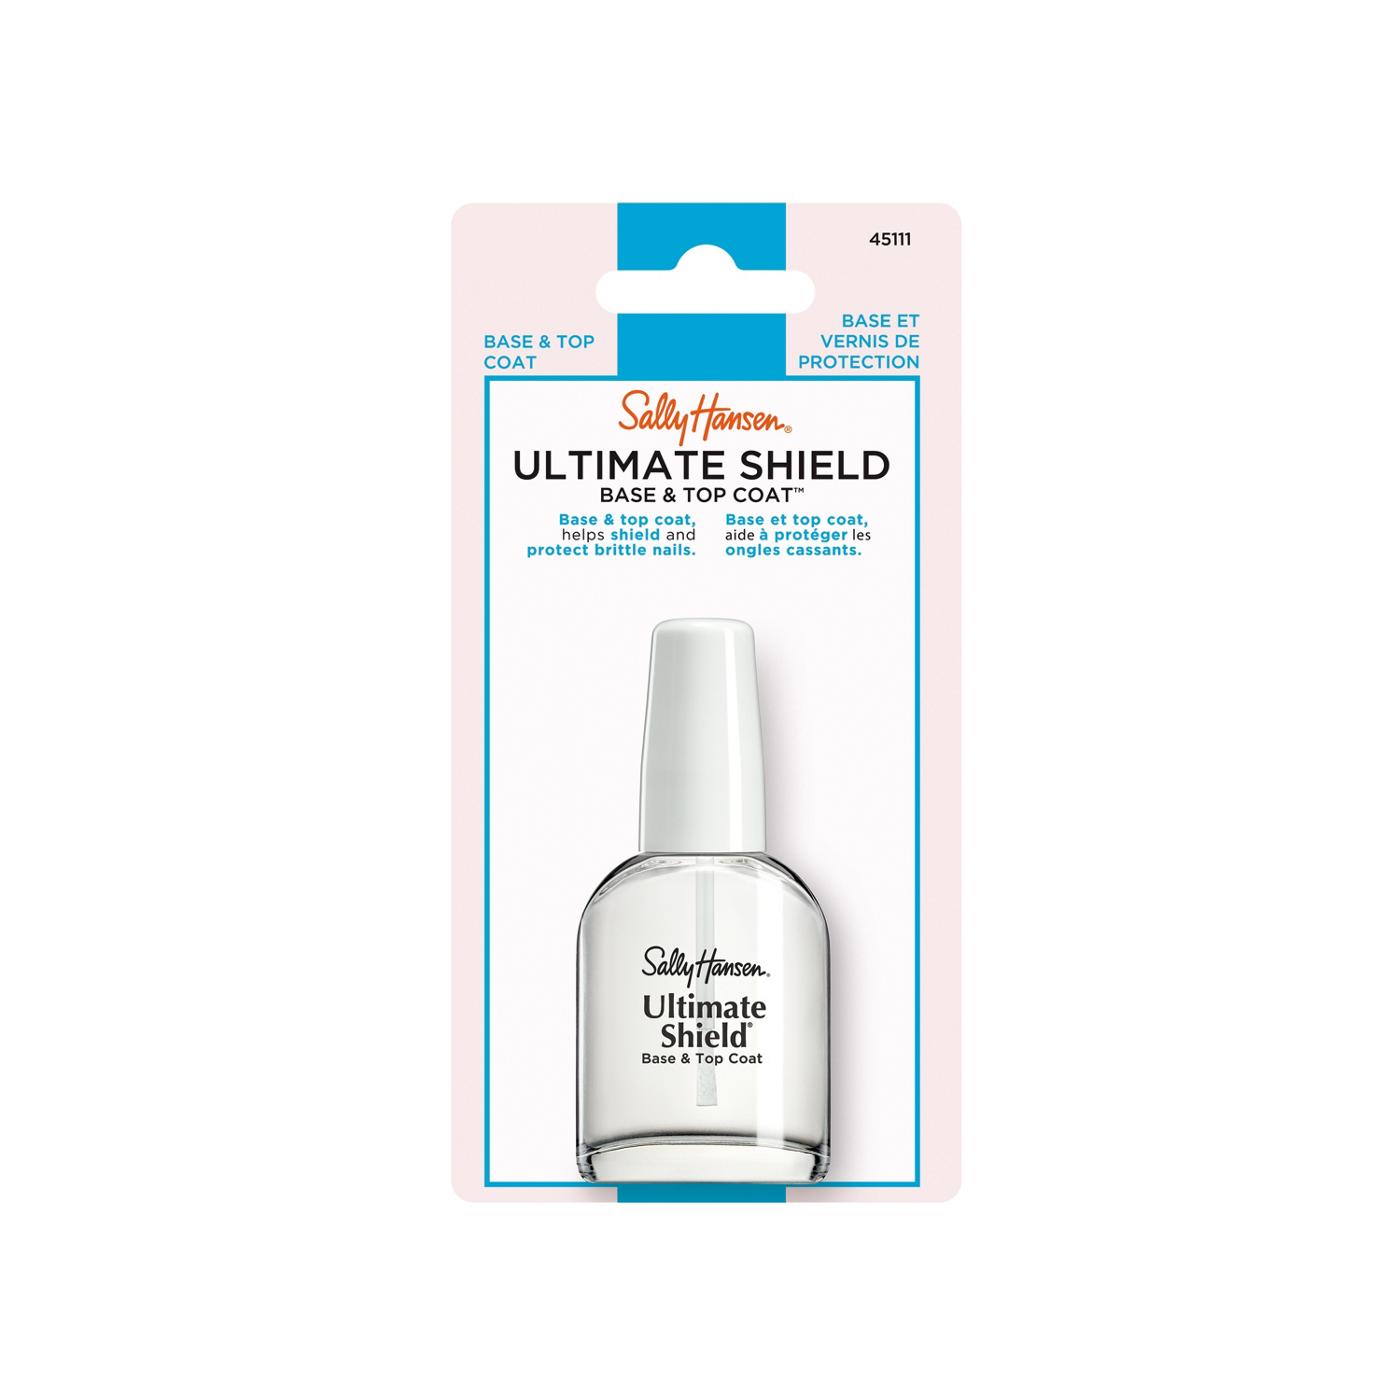 Sally Hansen Complete Treatment-Ultimate Shield; image 1 of 2